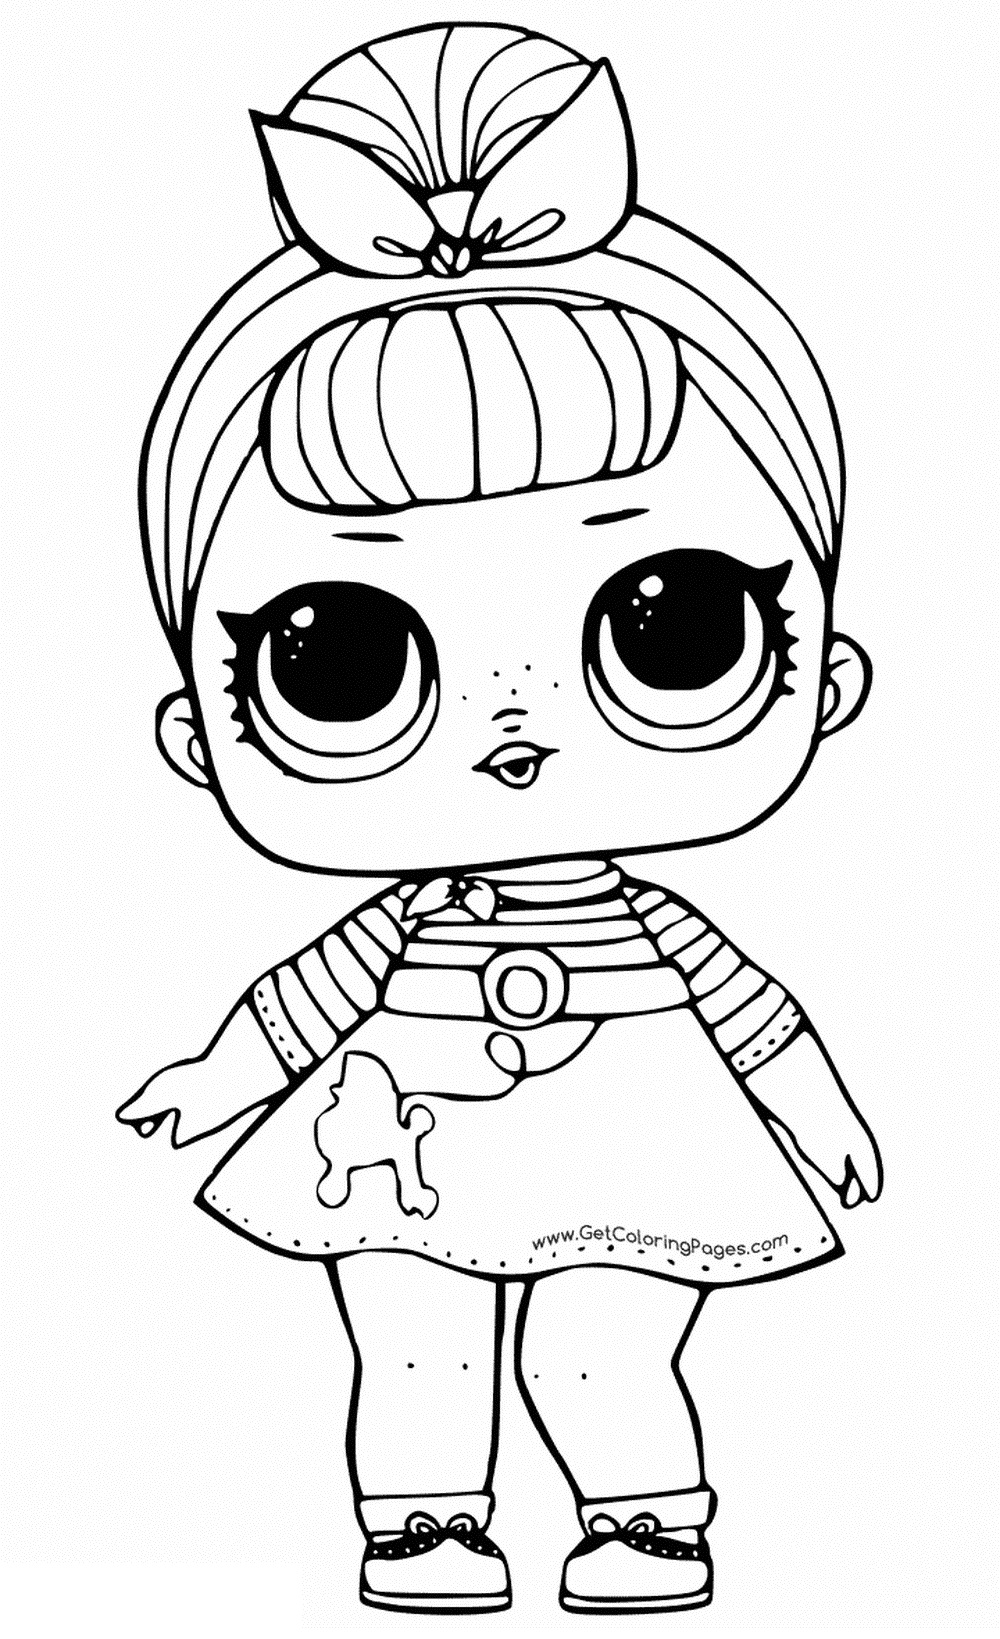 LOL Coloring Pages FREE Printable 17